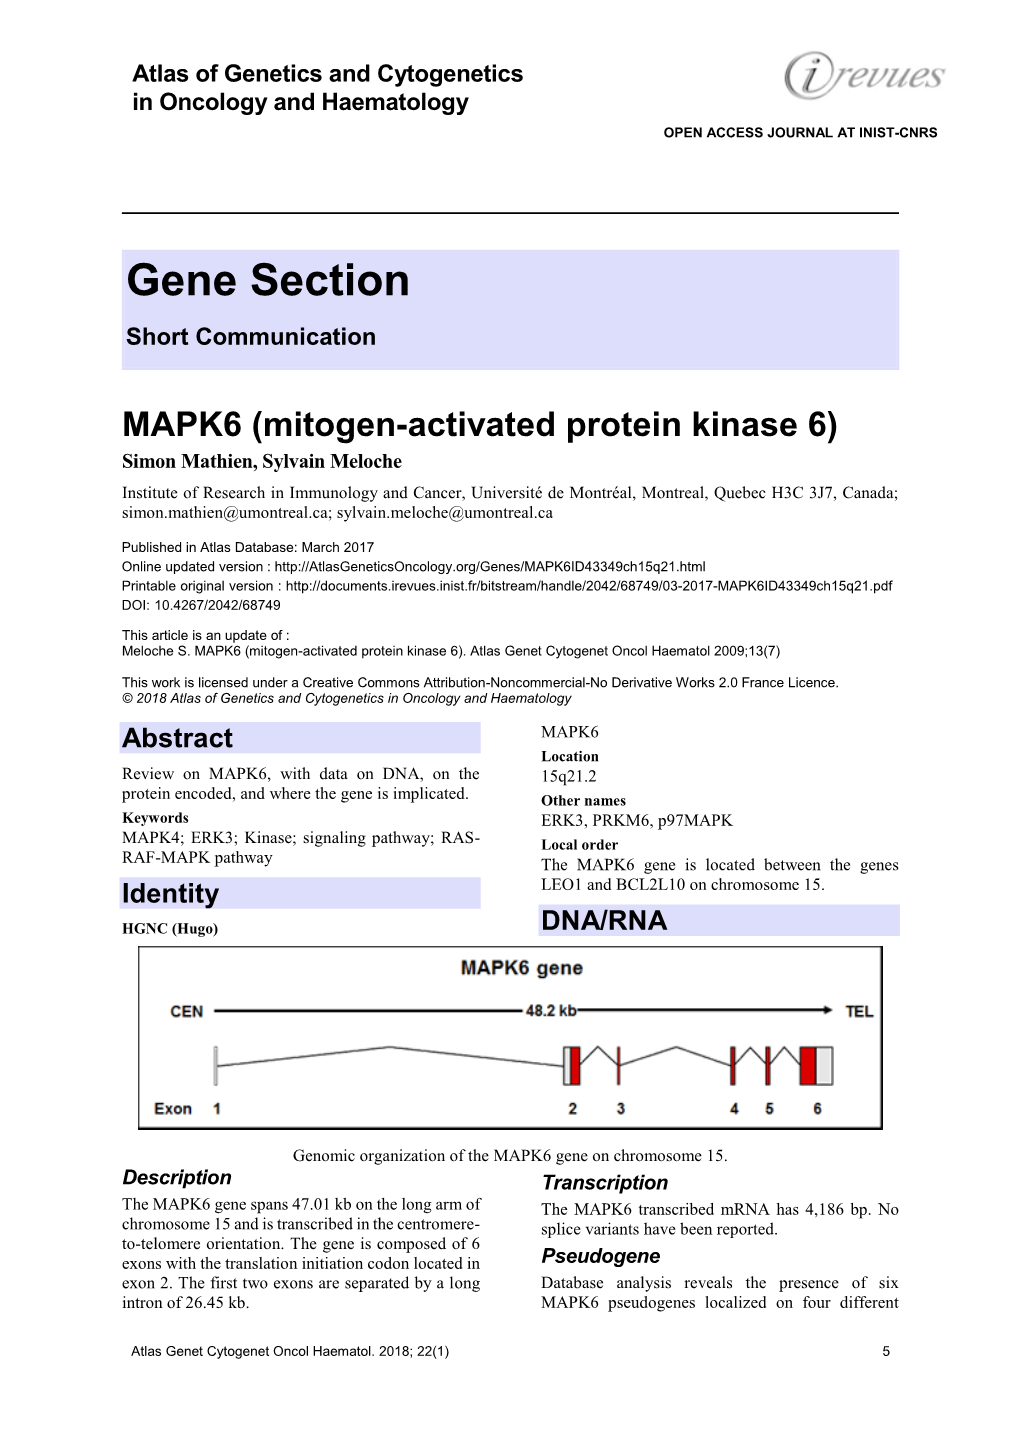 MAPK6 (Mitogen-Activated Protein Kinase 6)